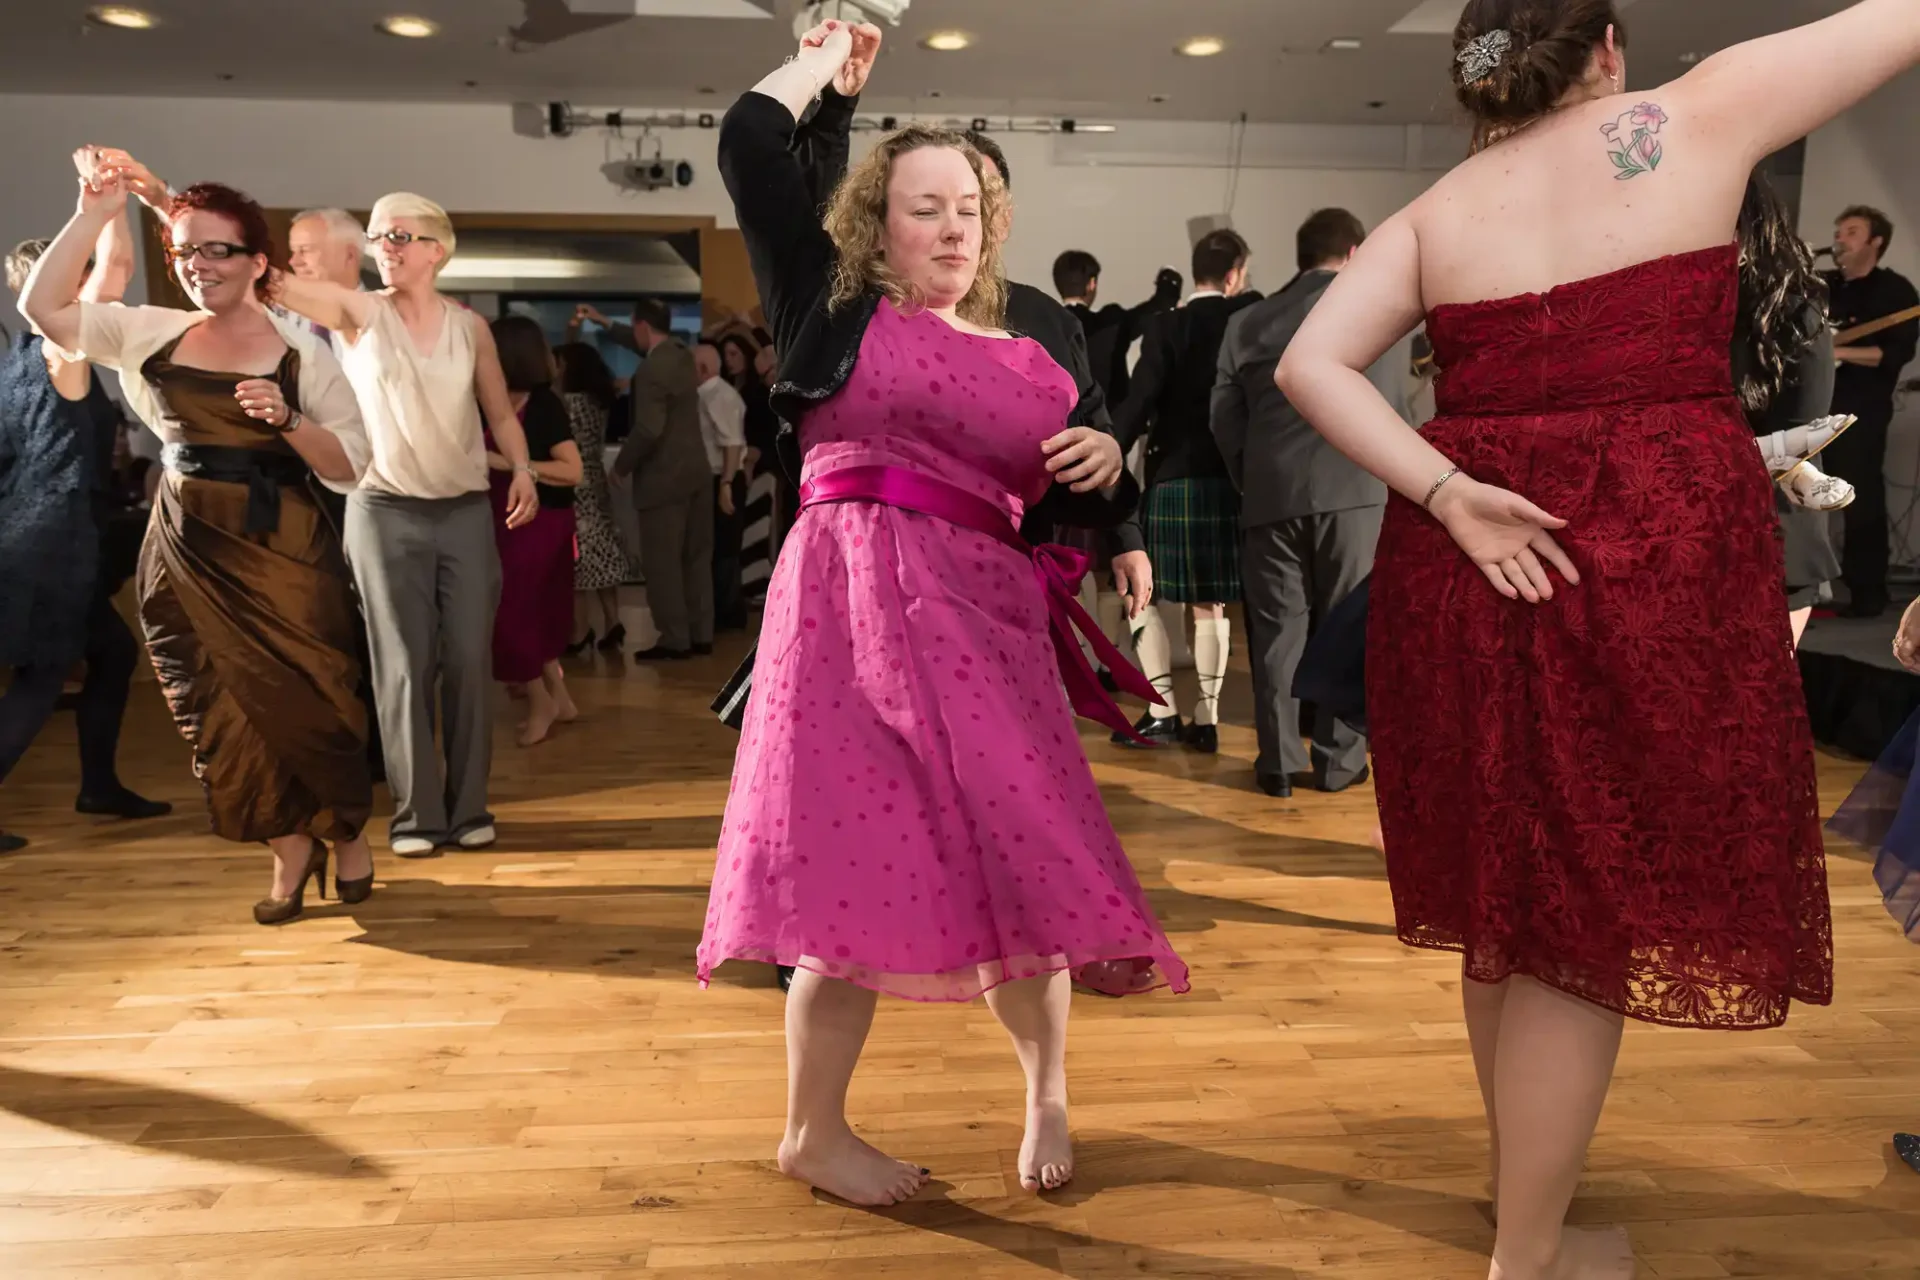 A group of people joyfully dancing at a formal event, with one woman in a pink polka-dot dress featured prominently in the foreground.